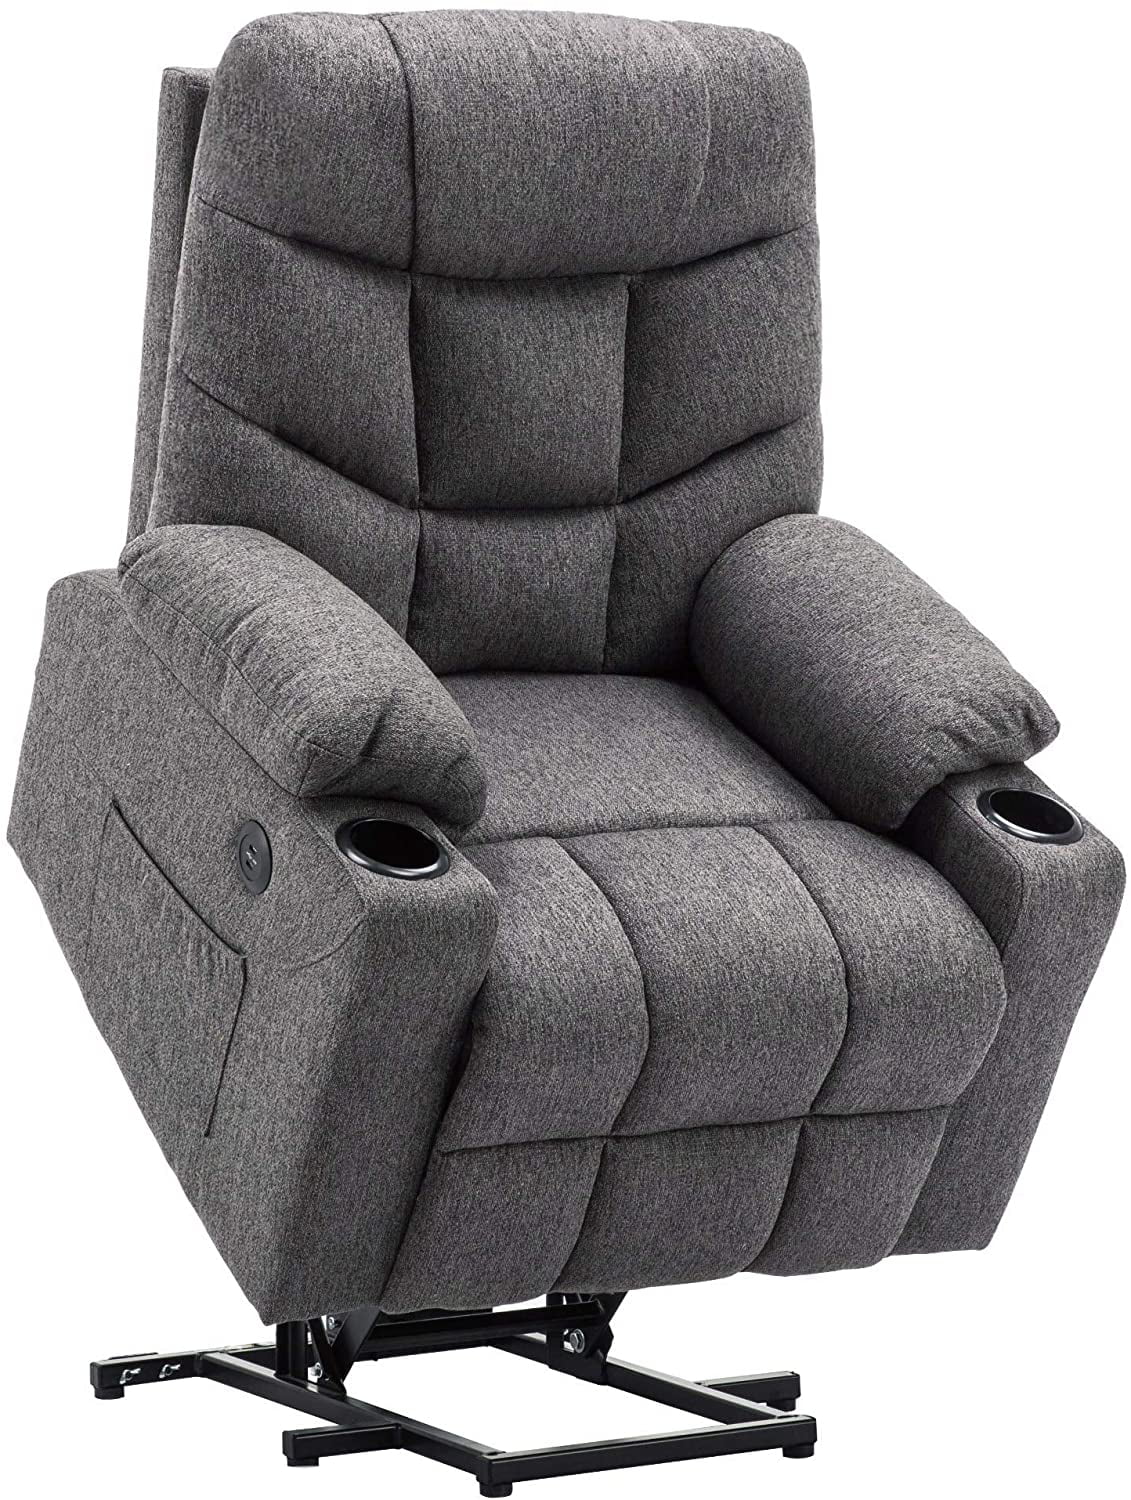 Mcombo Electric Power Lift Recliner Chair Sofa For Elderly 3 Positions 2 Side Pockets And Cup Holders Usb Ports Fabric 7286 Walmart Com Walmart Com